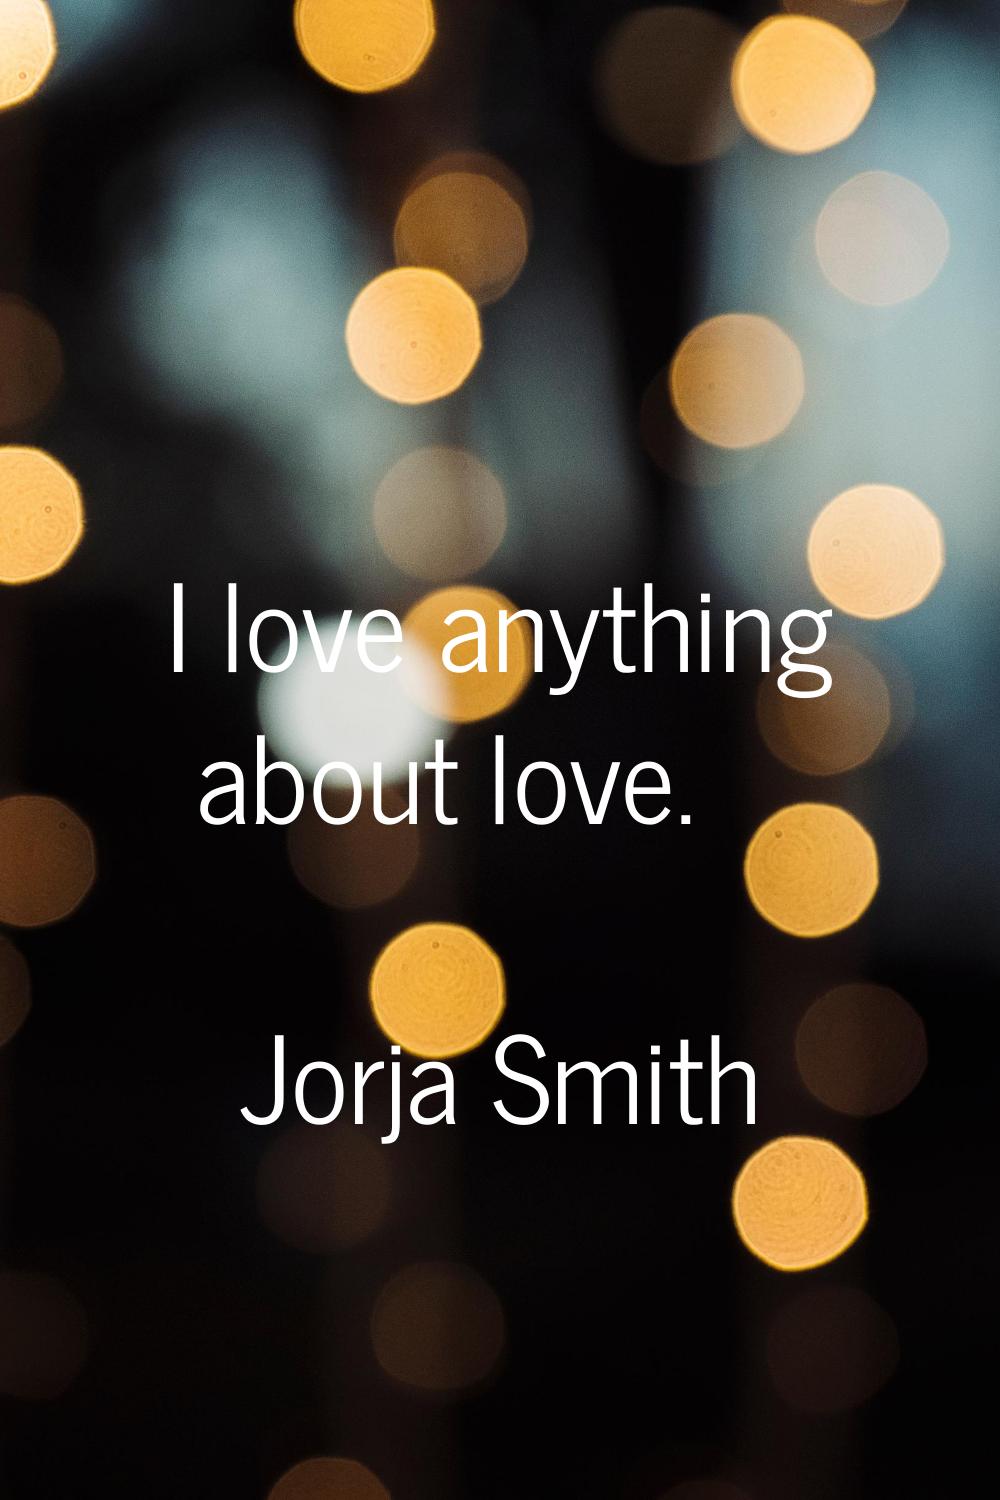 I love anything about love.